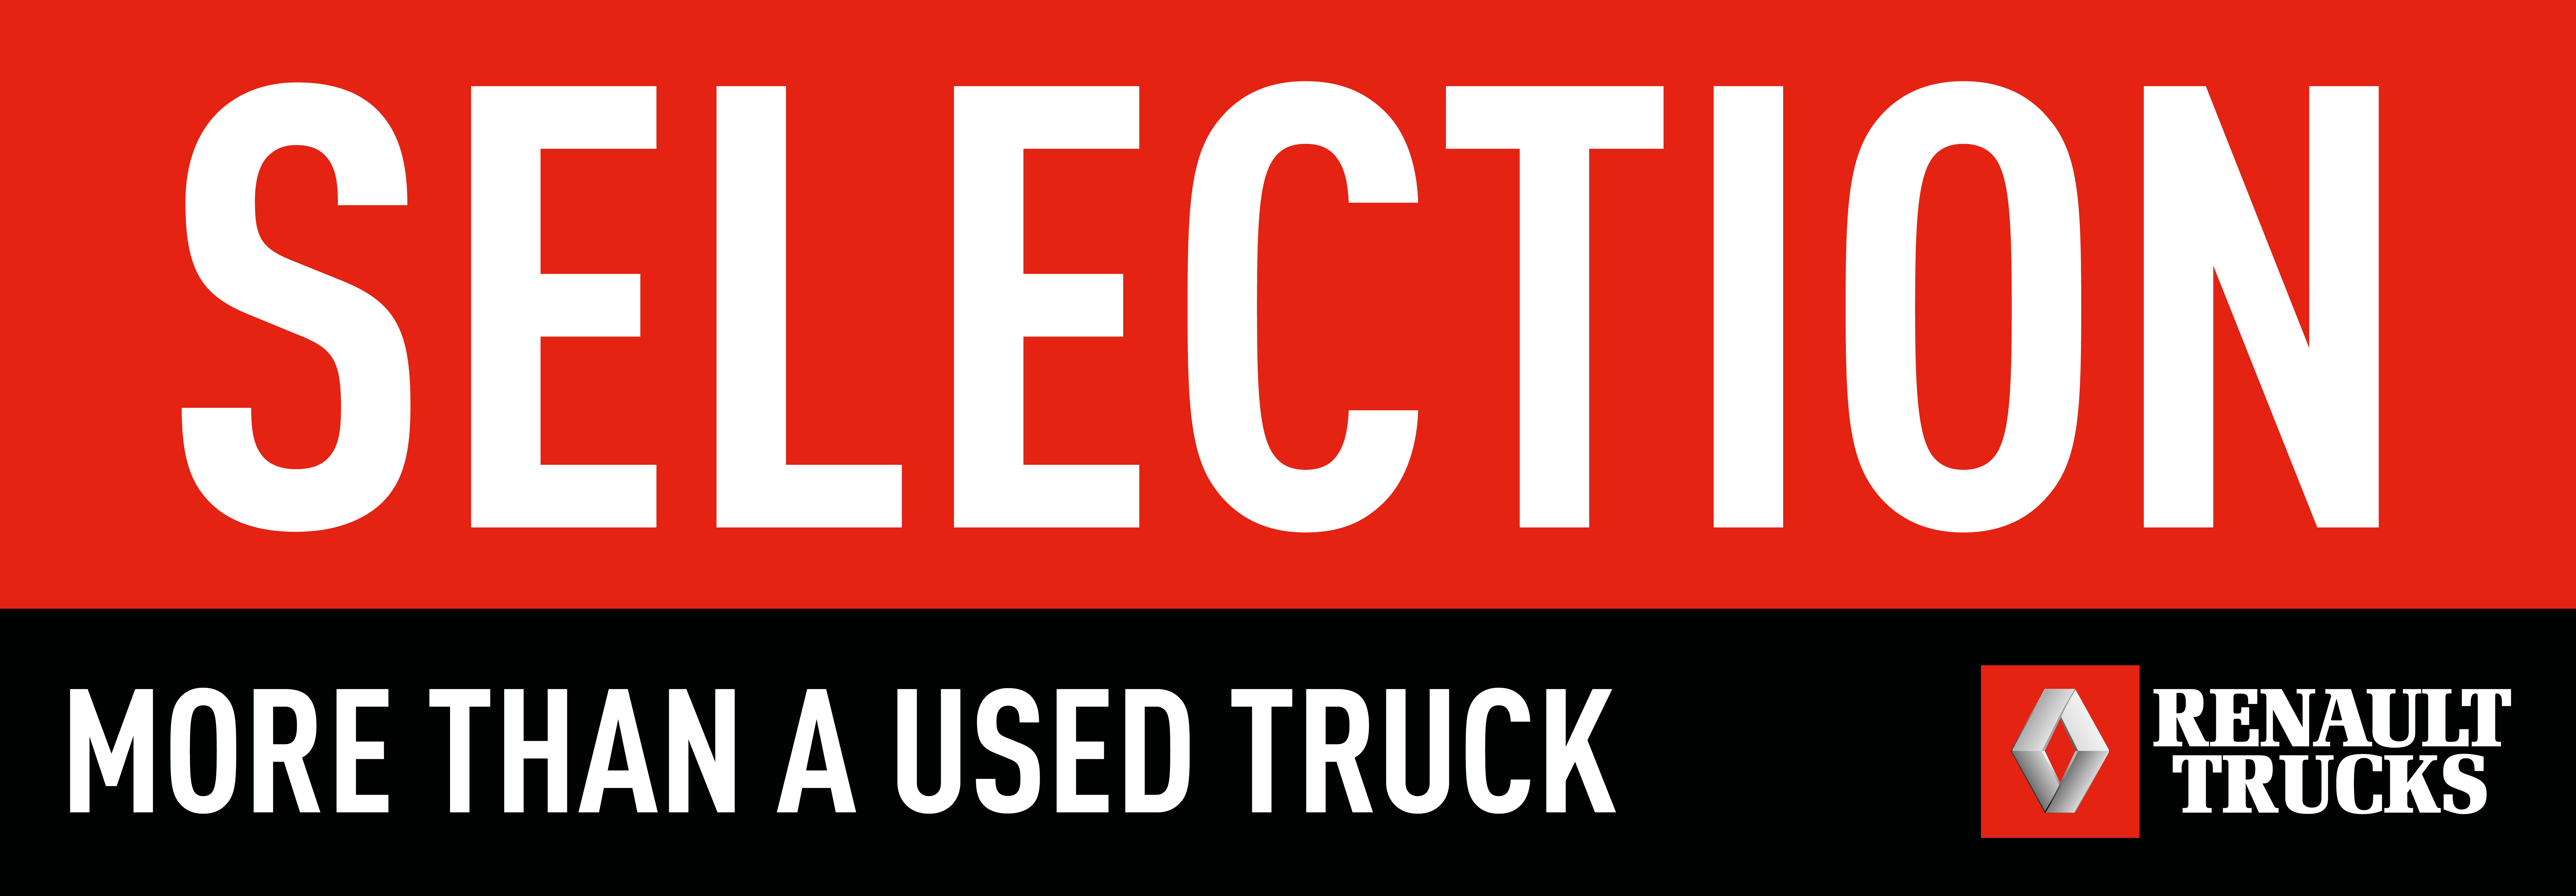 Selection Used Trucks